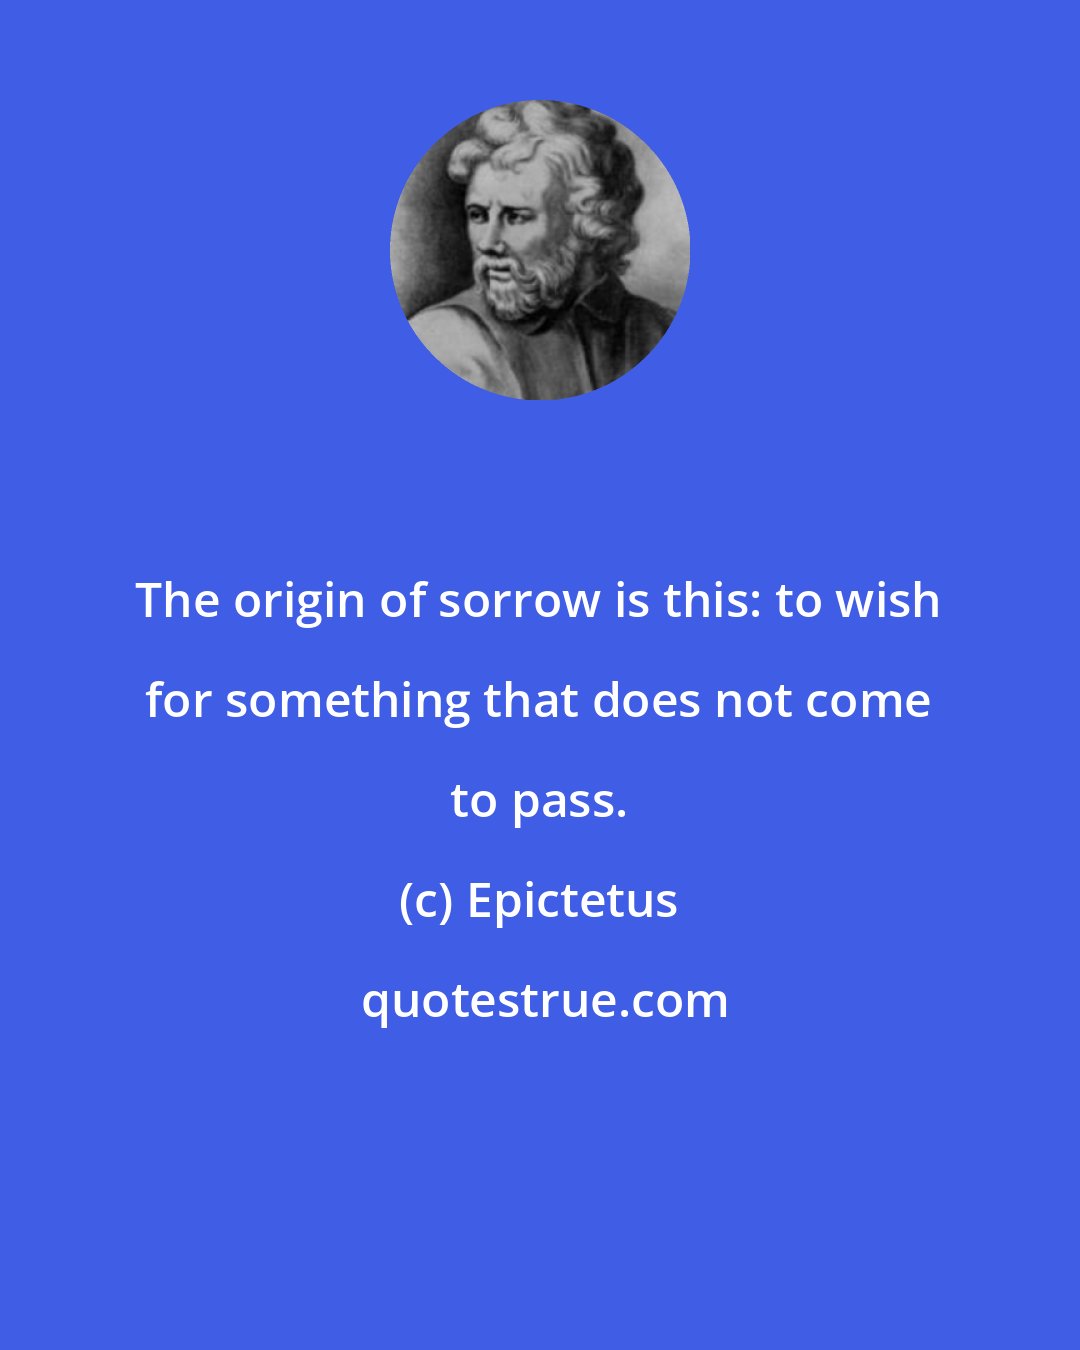 Epictetus: The origin of sorrow is this: to wish for something that does not come to pass.